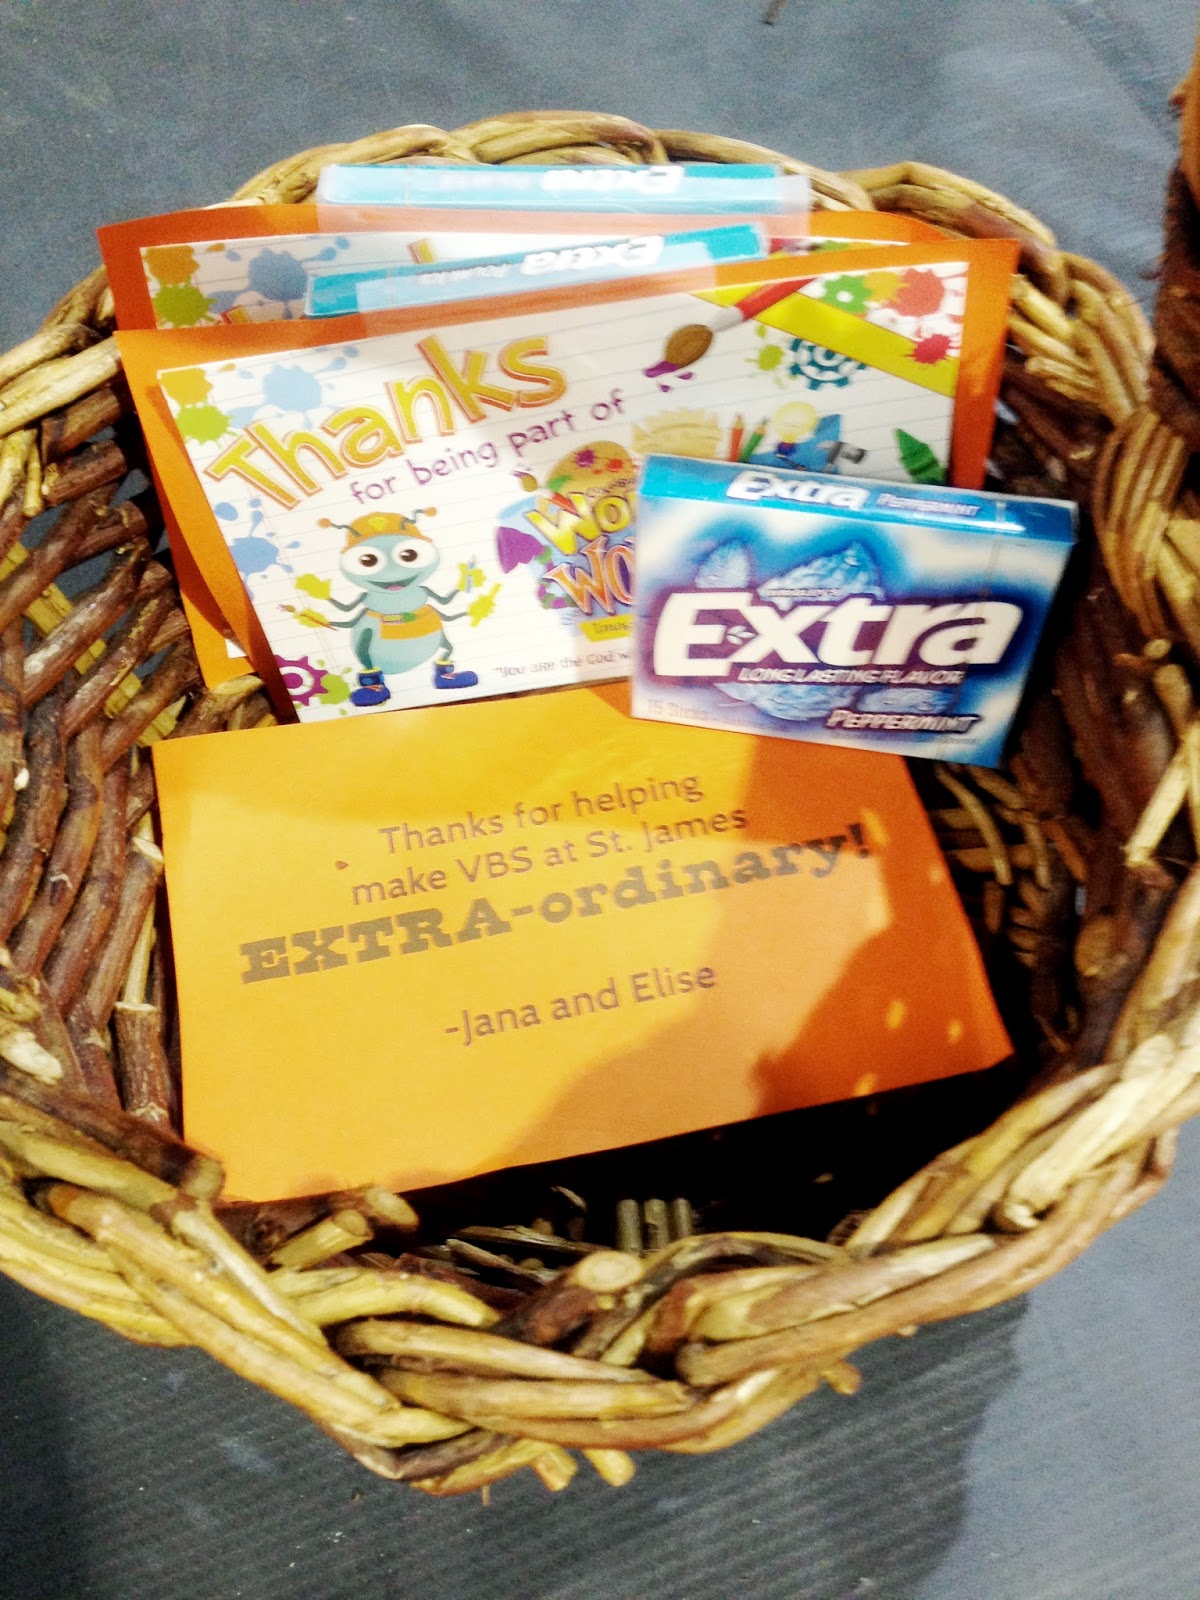 Dancing Commas :: Workshop of Wonders VBS :: Thank you gift for VBS volunteers ... Extra gum and a note that says "Thanks for making VBS EXTRA-ordinary!"